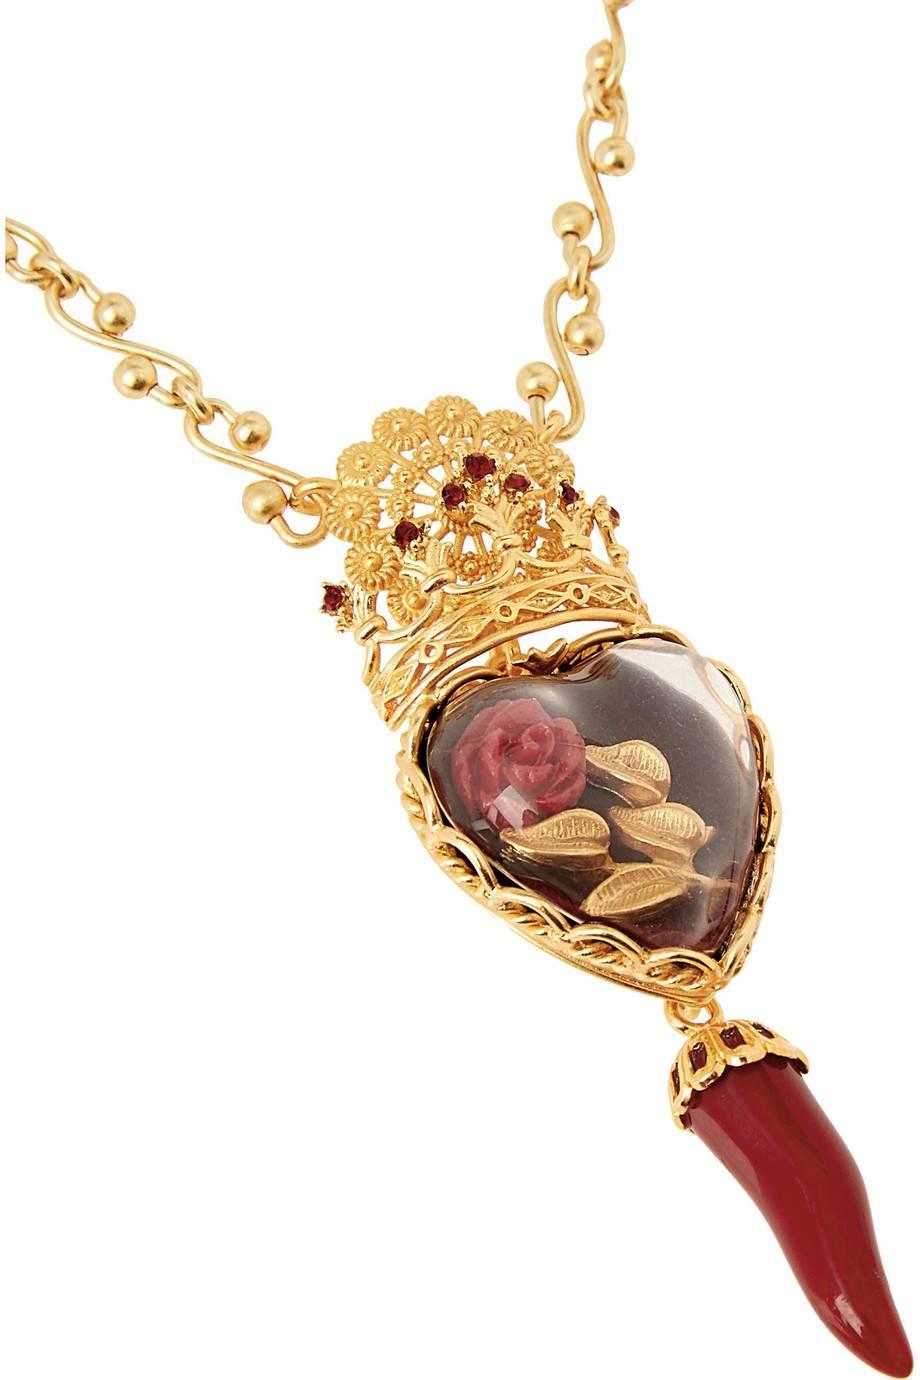 CURATOR'S NOTES

Brass
Gold tone
Swarovski crystals
Resin rose
Lobster claw closure 
Made in Italy
Pendant 3